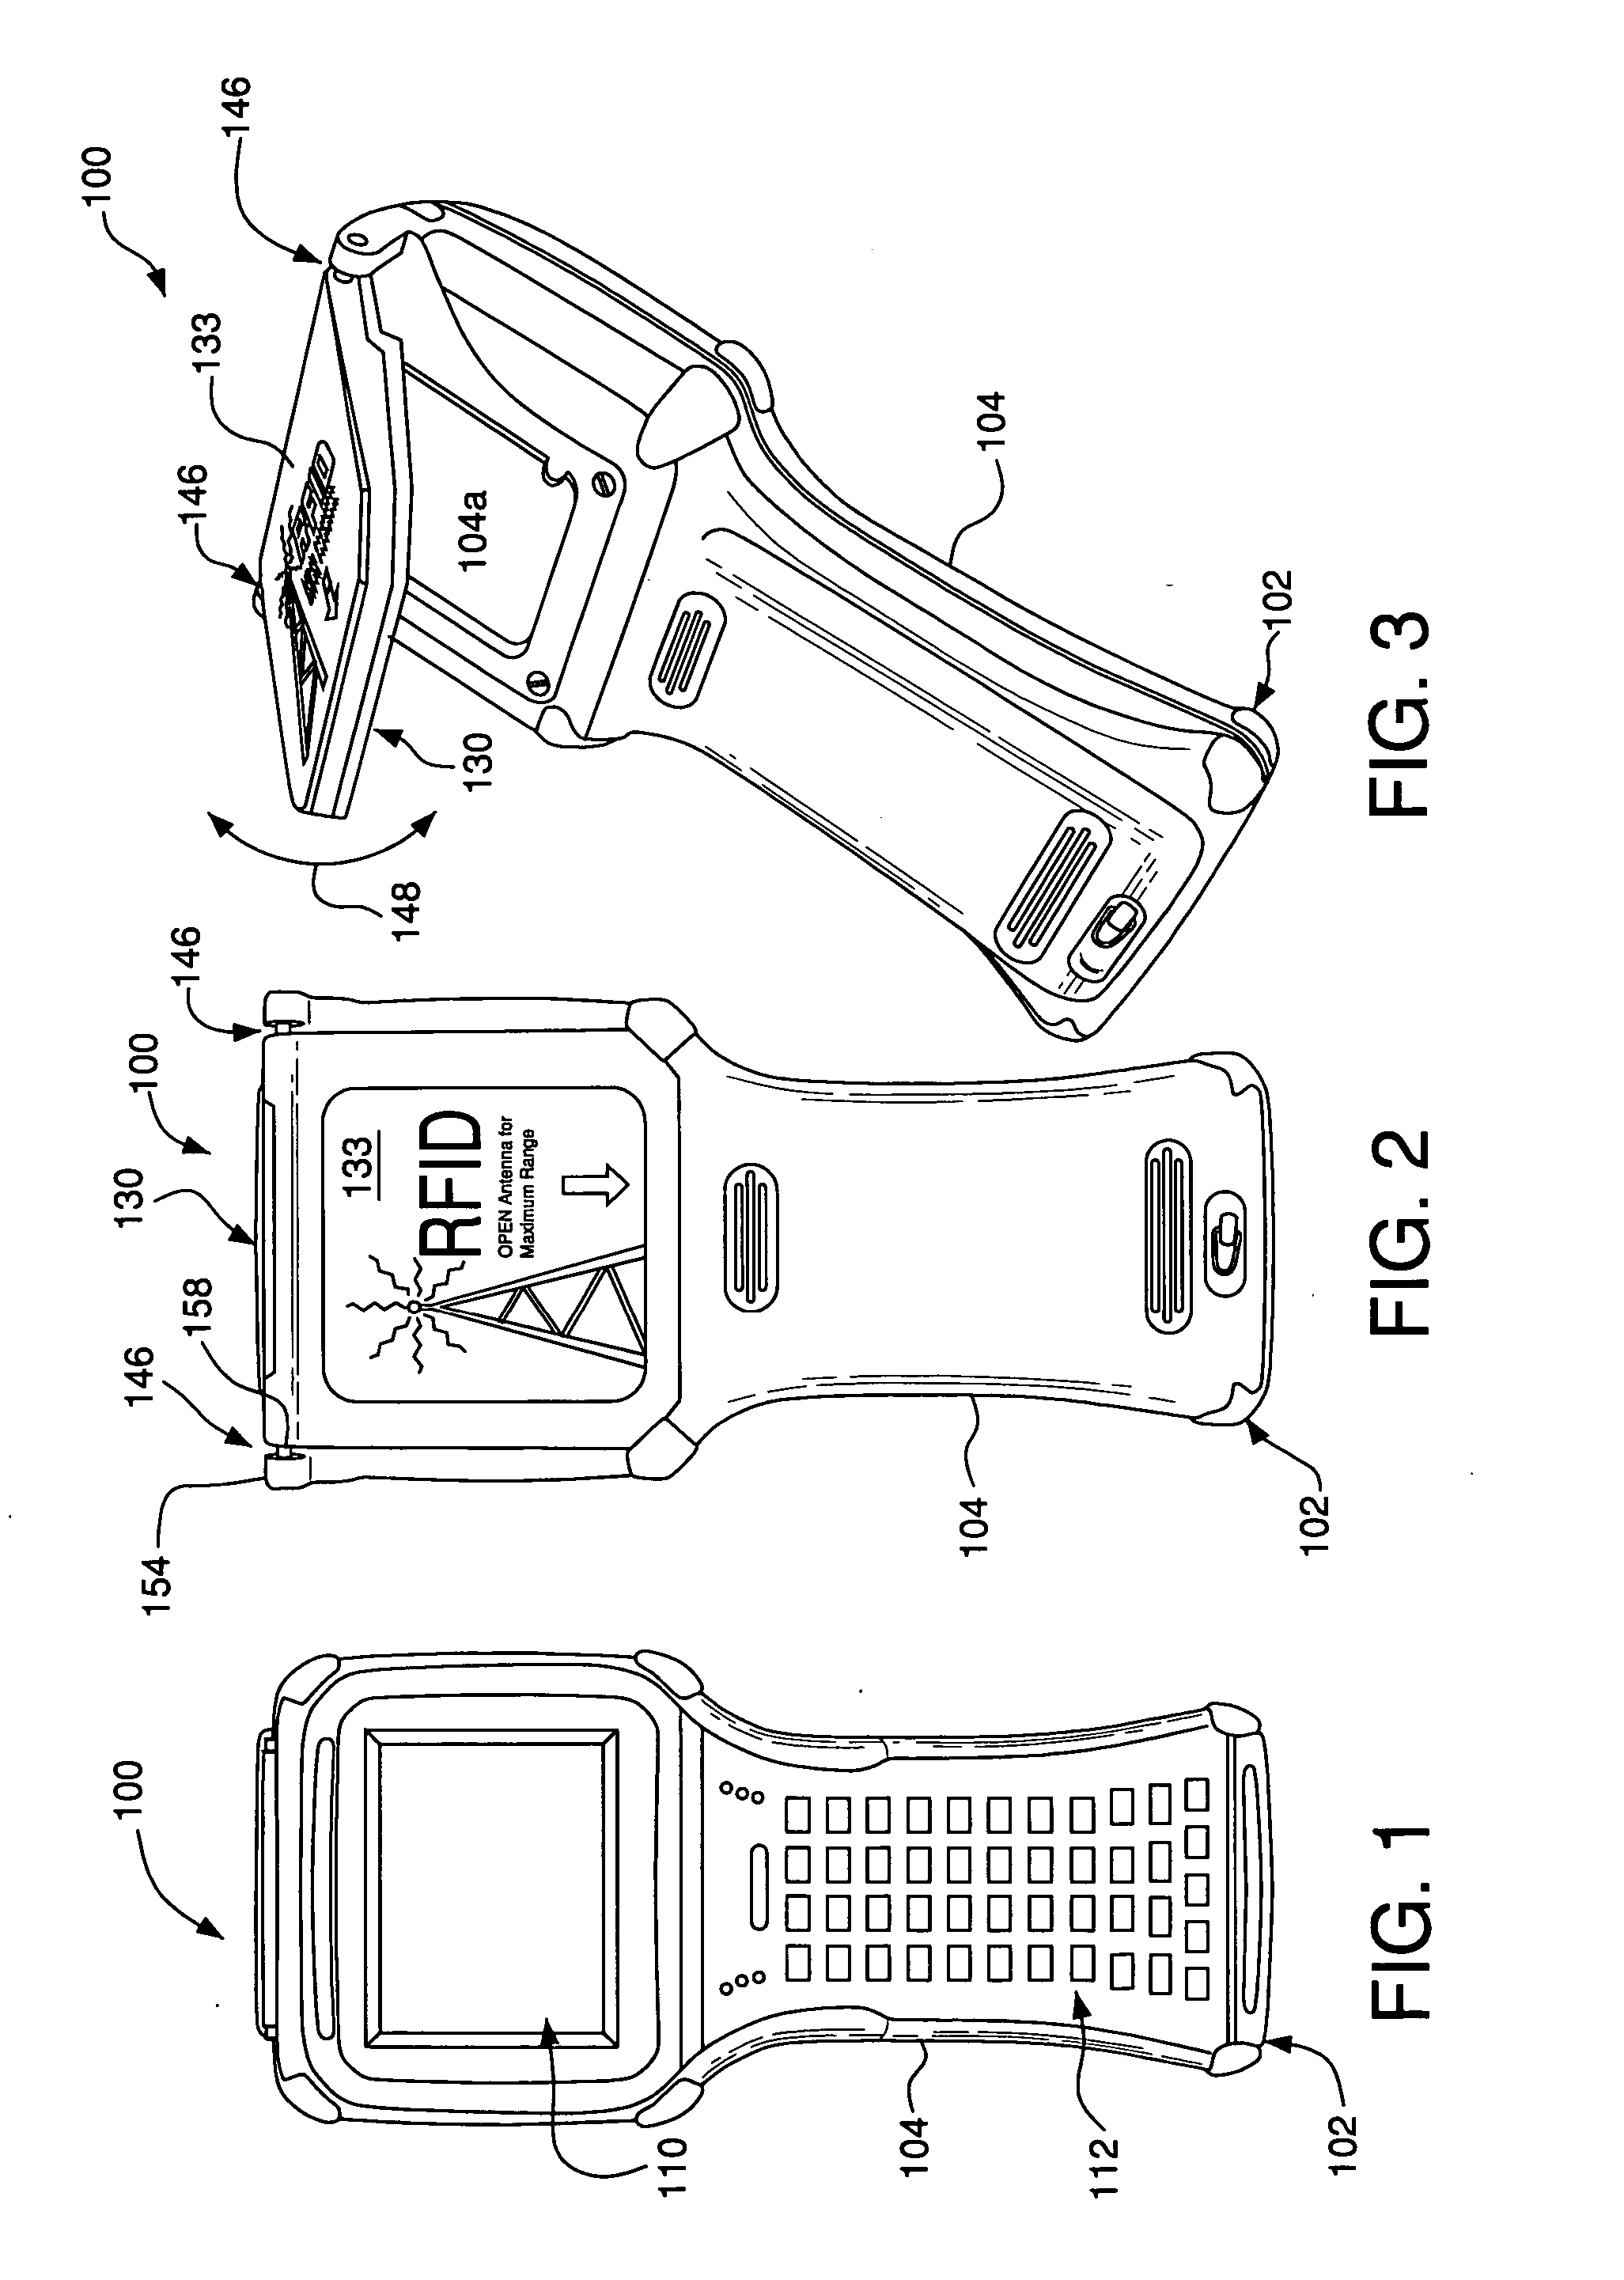 Radio frequency identification device with movable antenna